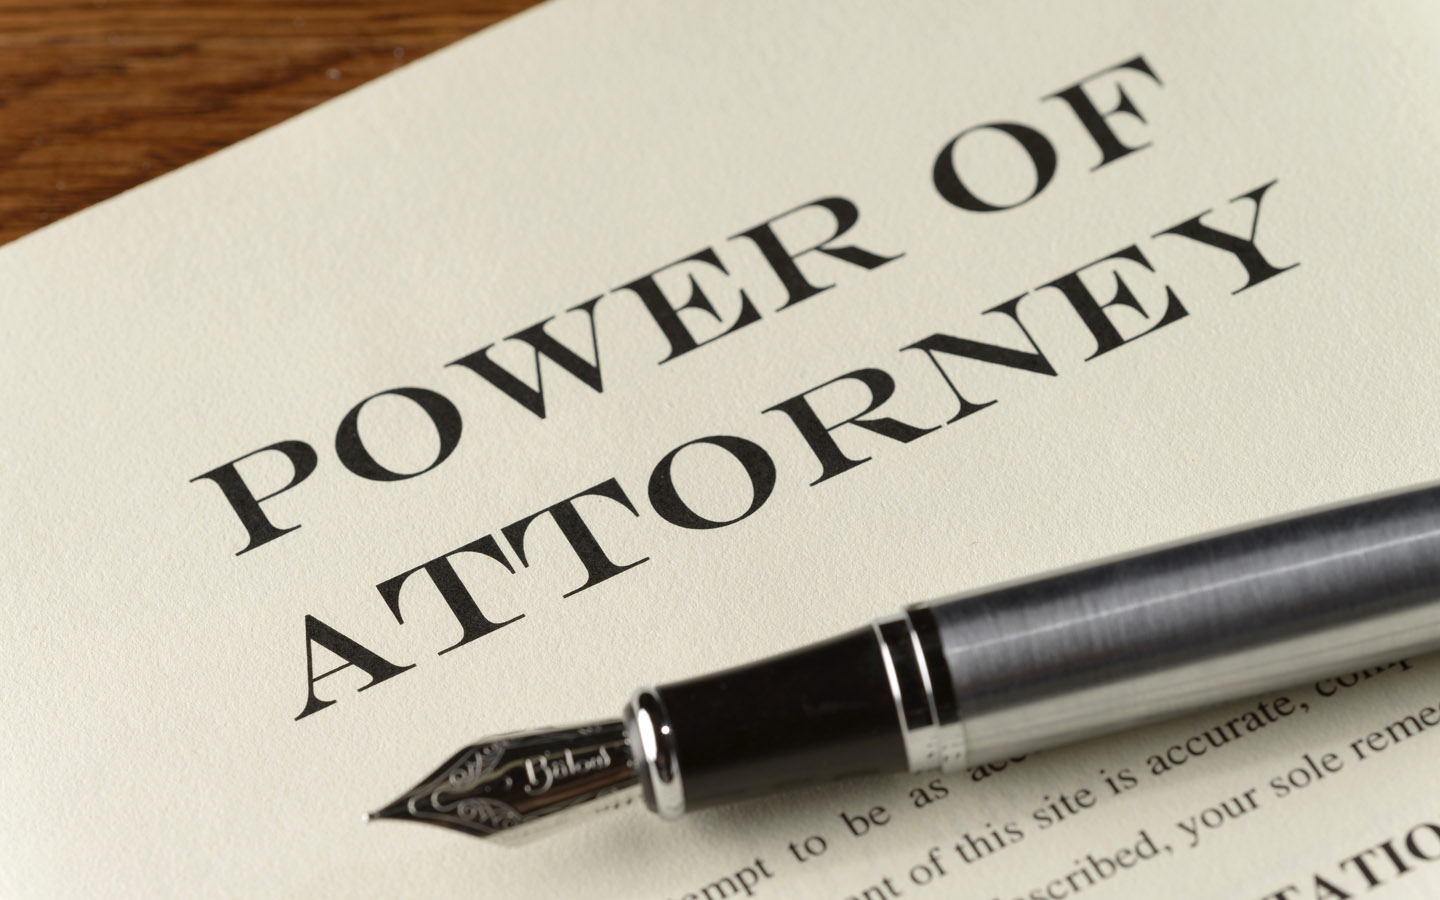 power of attorney document is essential for if you want to Sell a Property in Dubai from Abroad